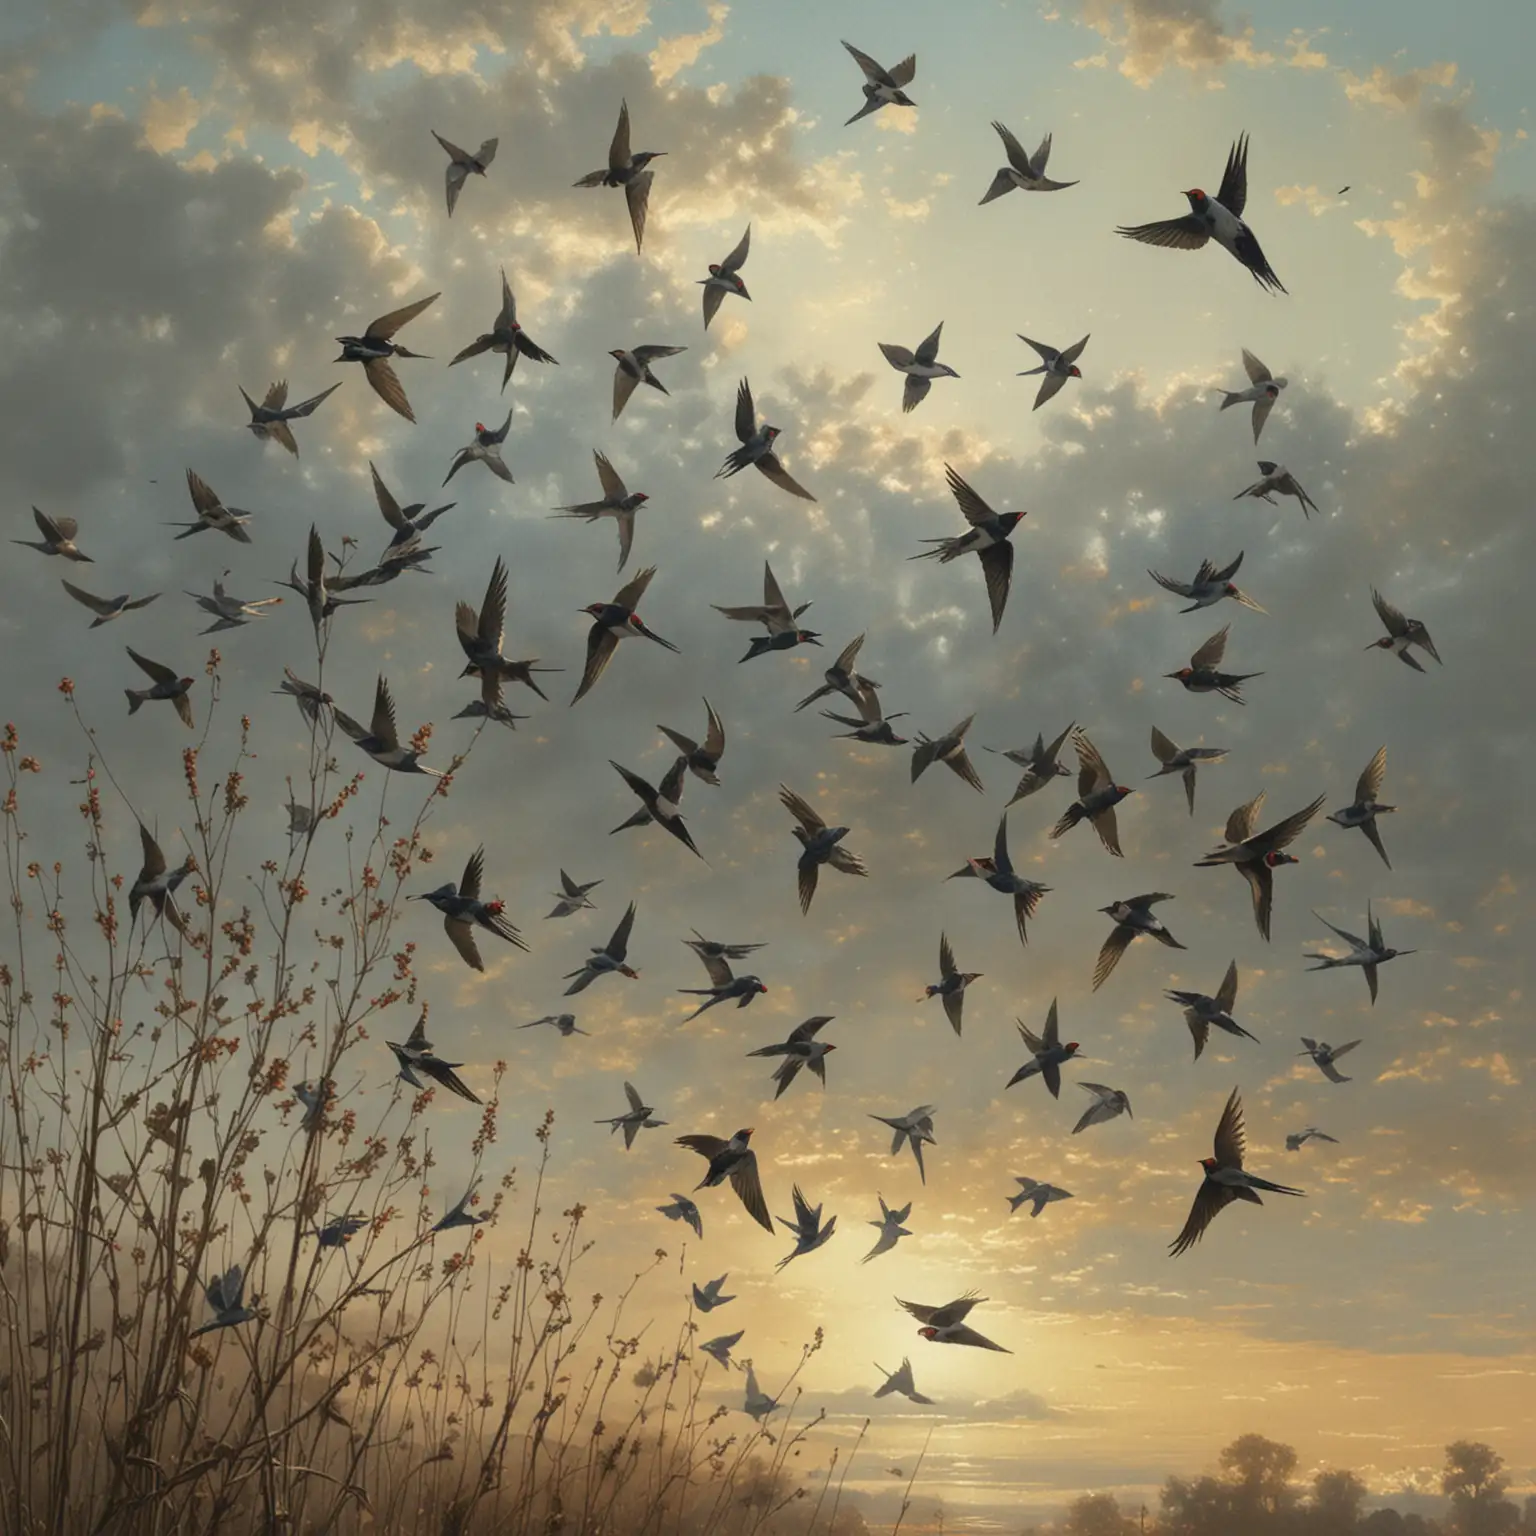 A flock of swallows